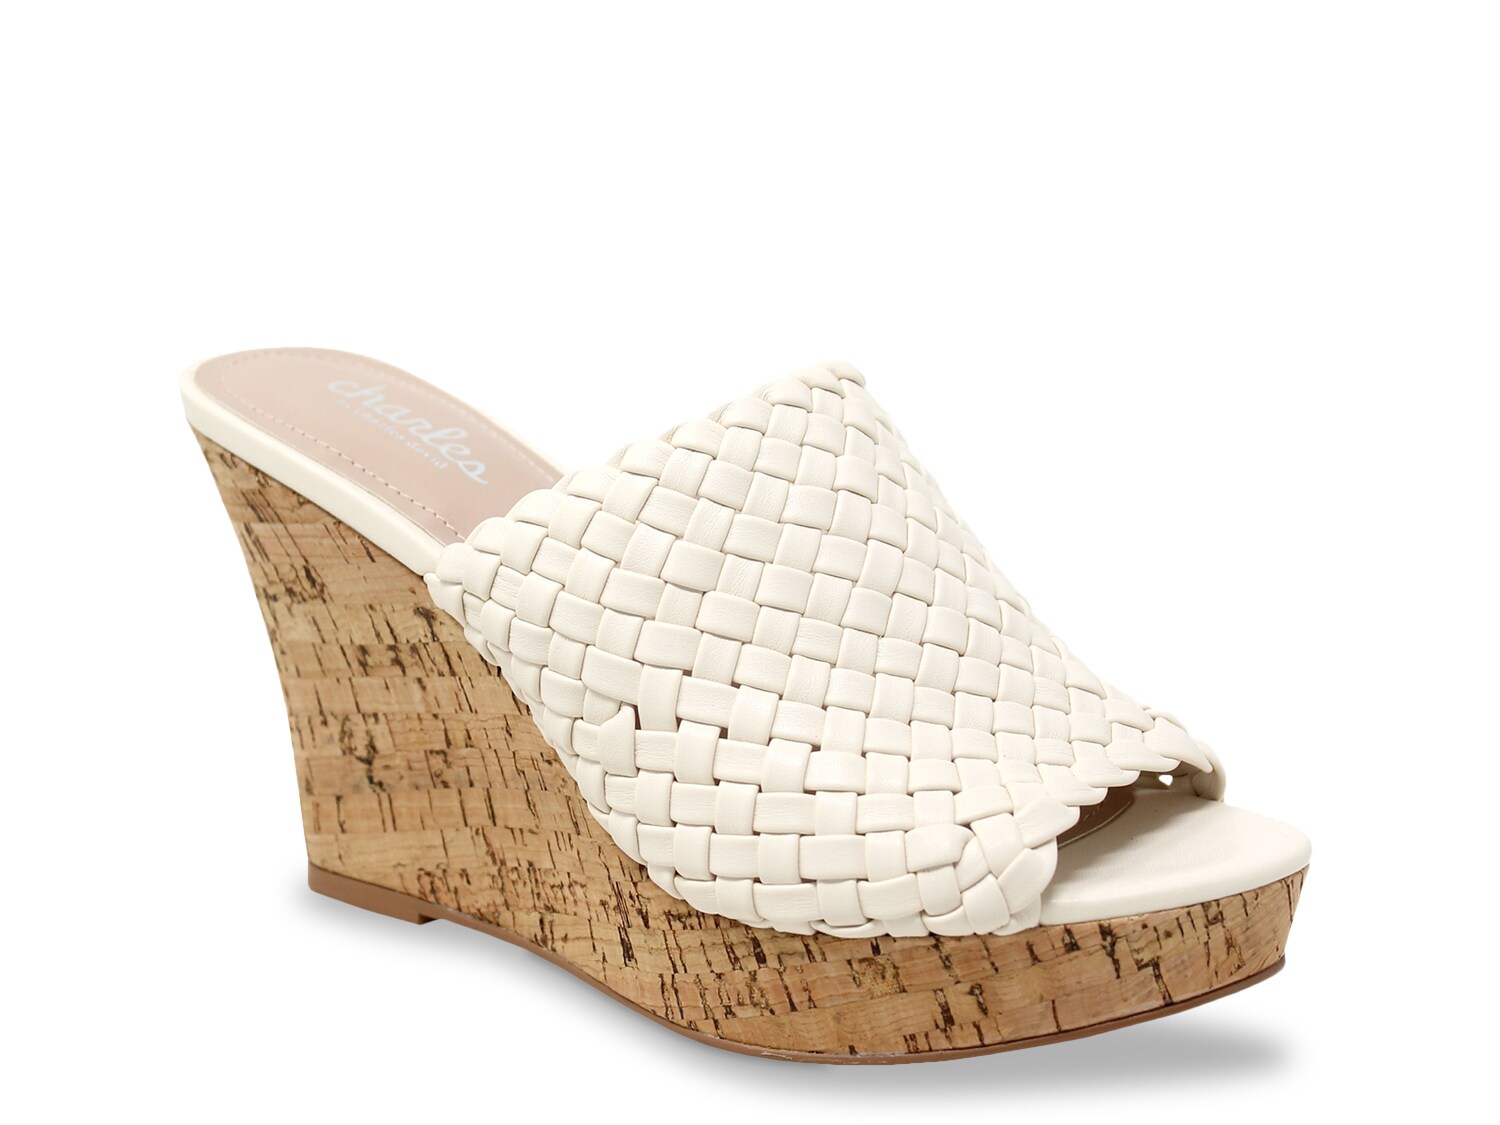 Charles by Charles David Lolli Wedge Sandal - Free Shipping | DSW